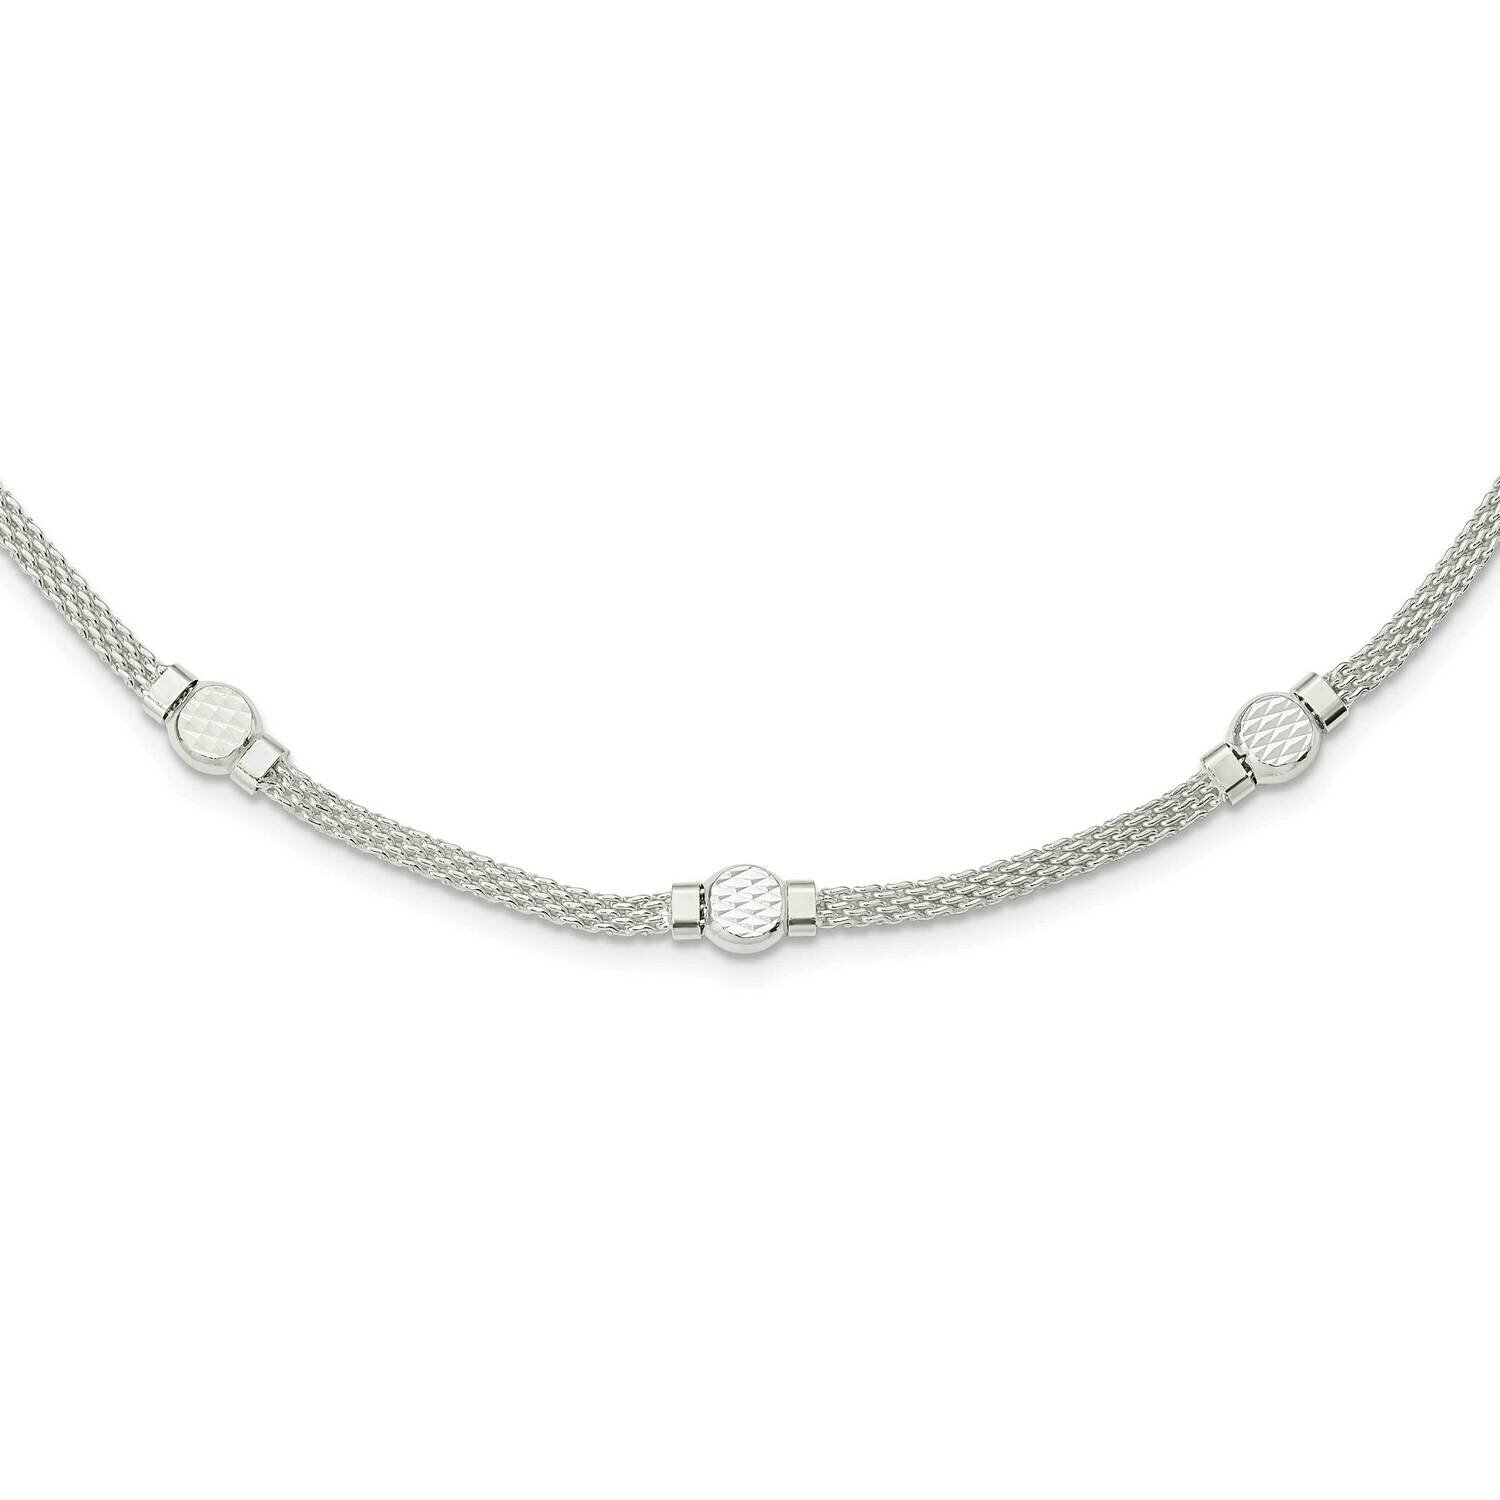 Mesh Fancy Necklace 18 Inch Sterling Silver QG5995-18